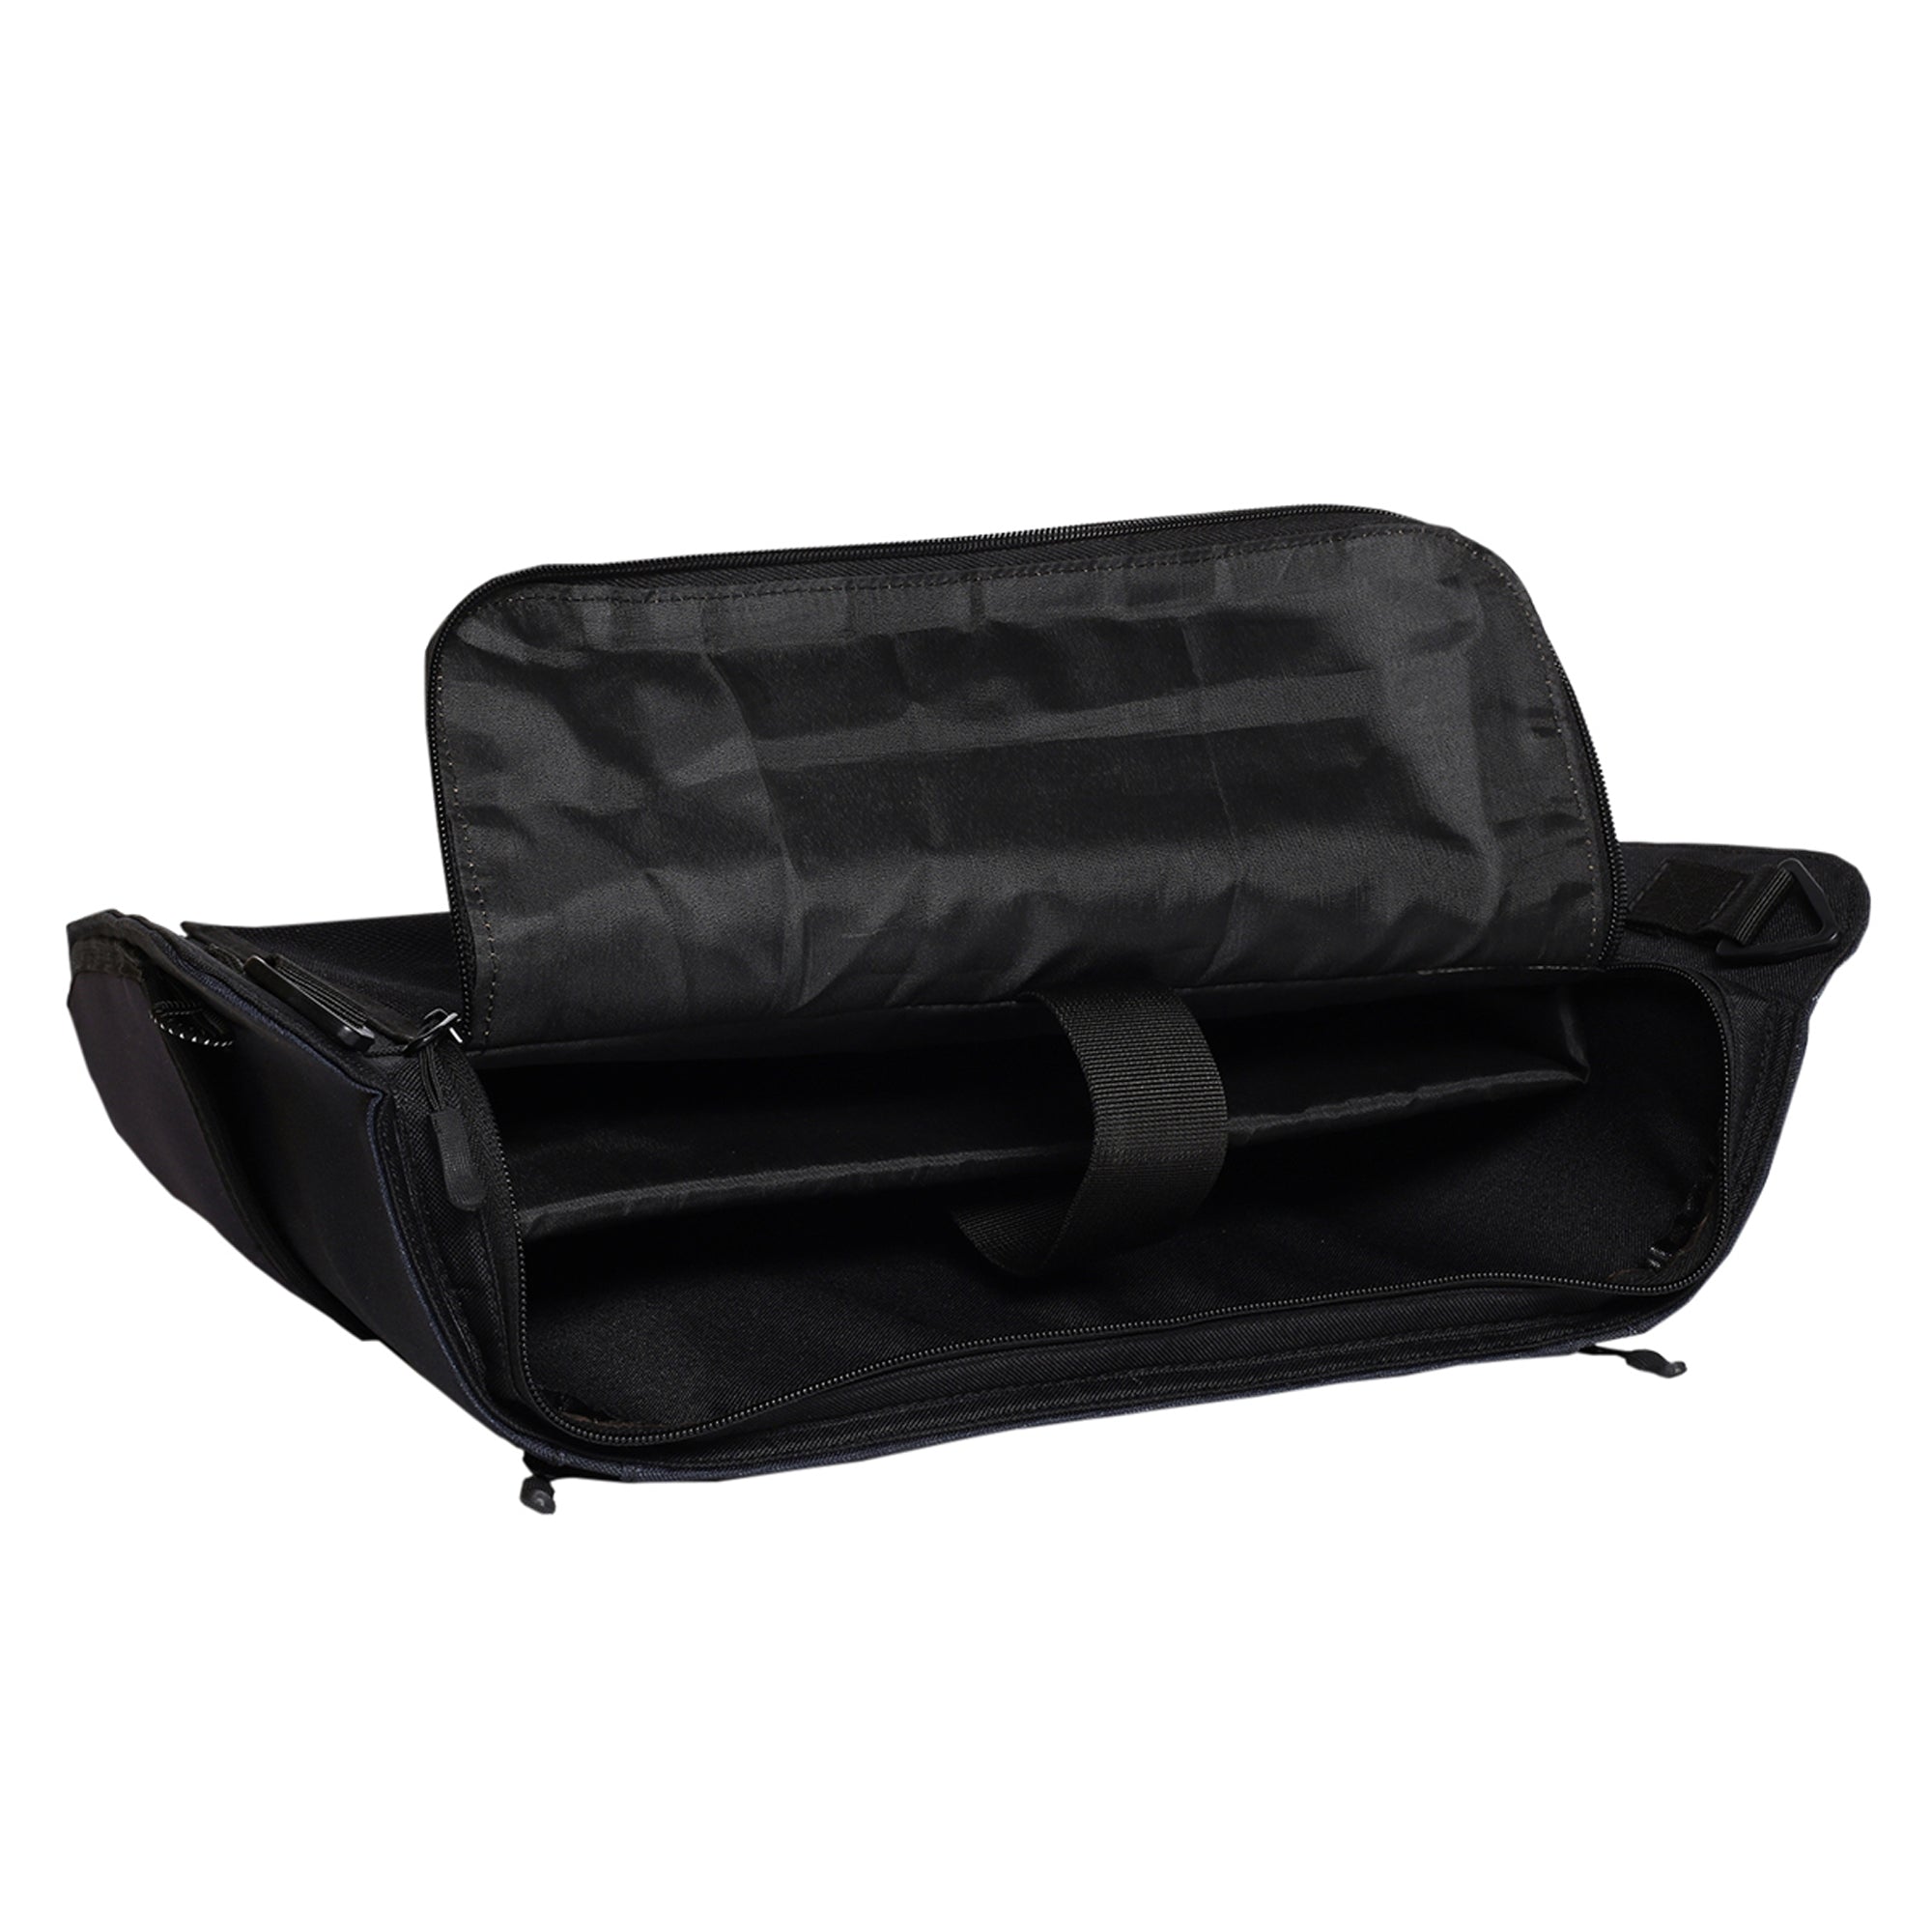  NTORQ FRONT STORAGE BAG - YOUTH